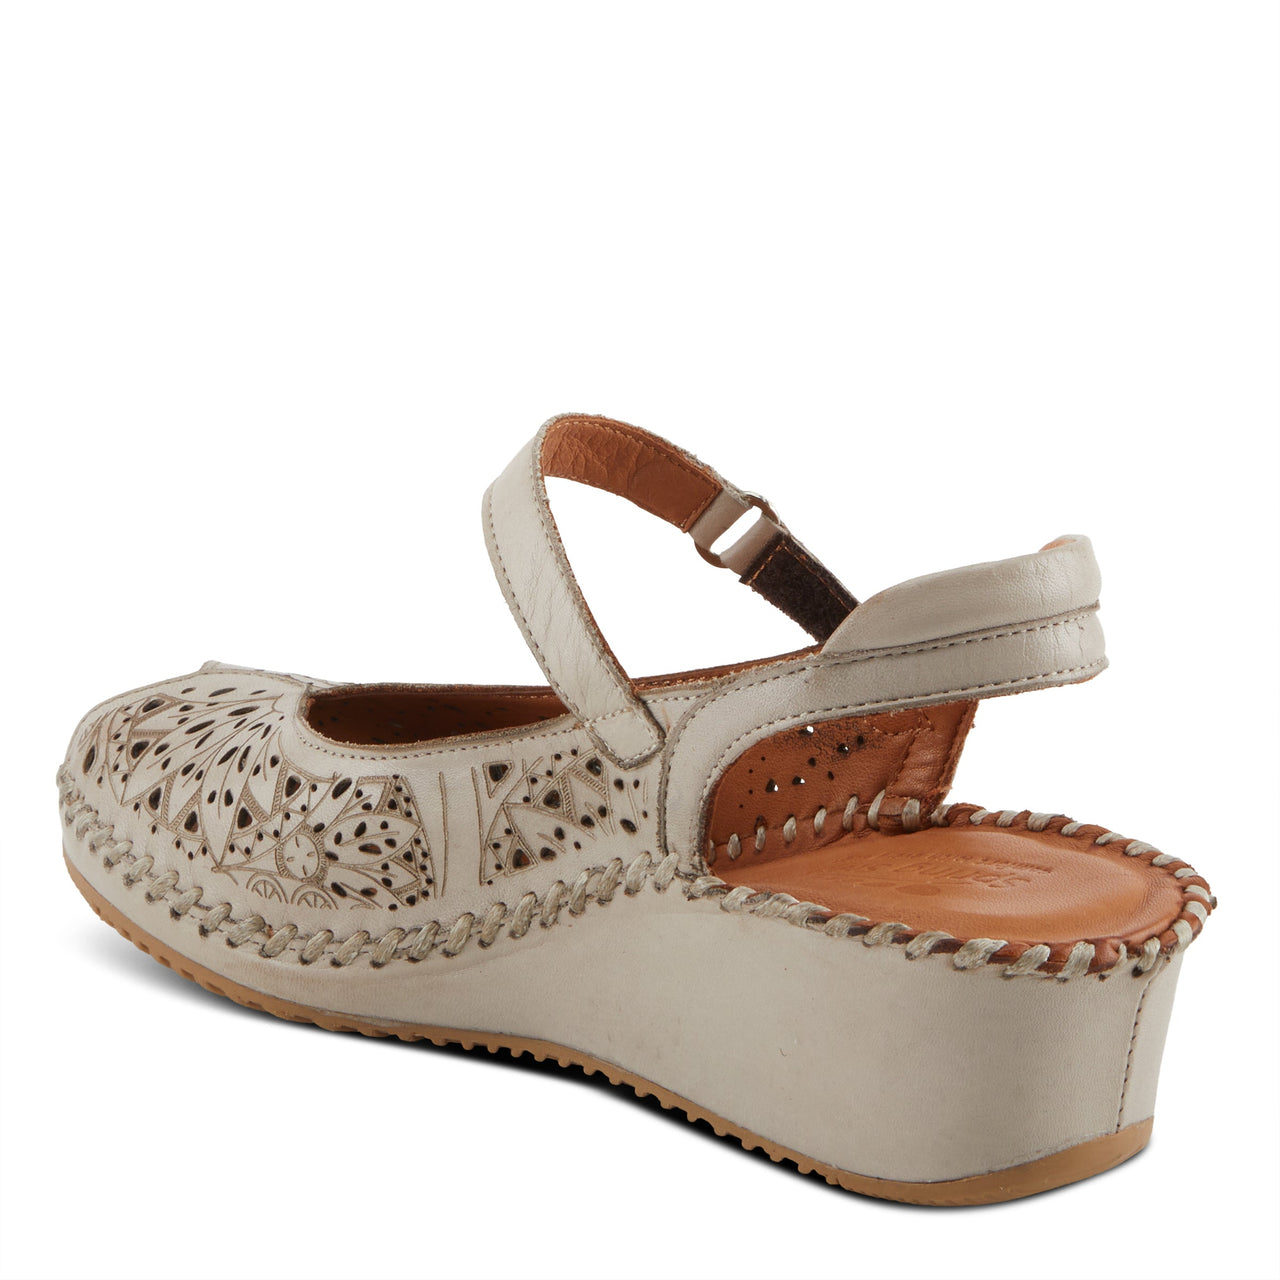 Spring Step Santonio Sandals featuring a cushioned footbed for extra support